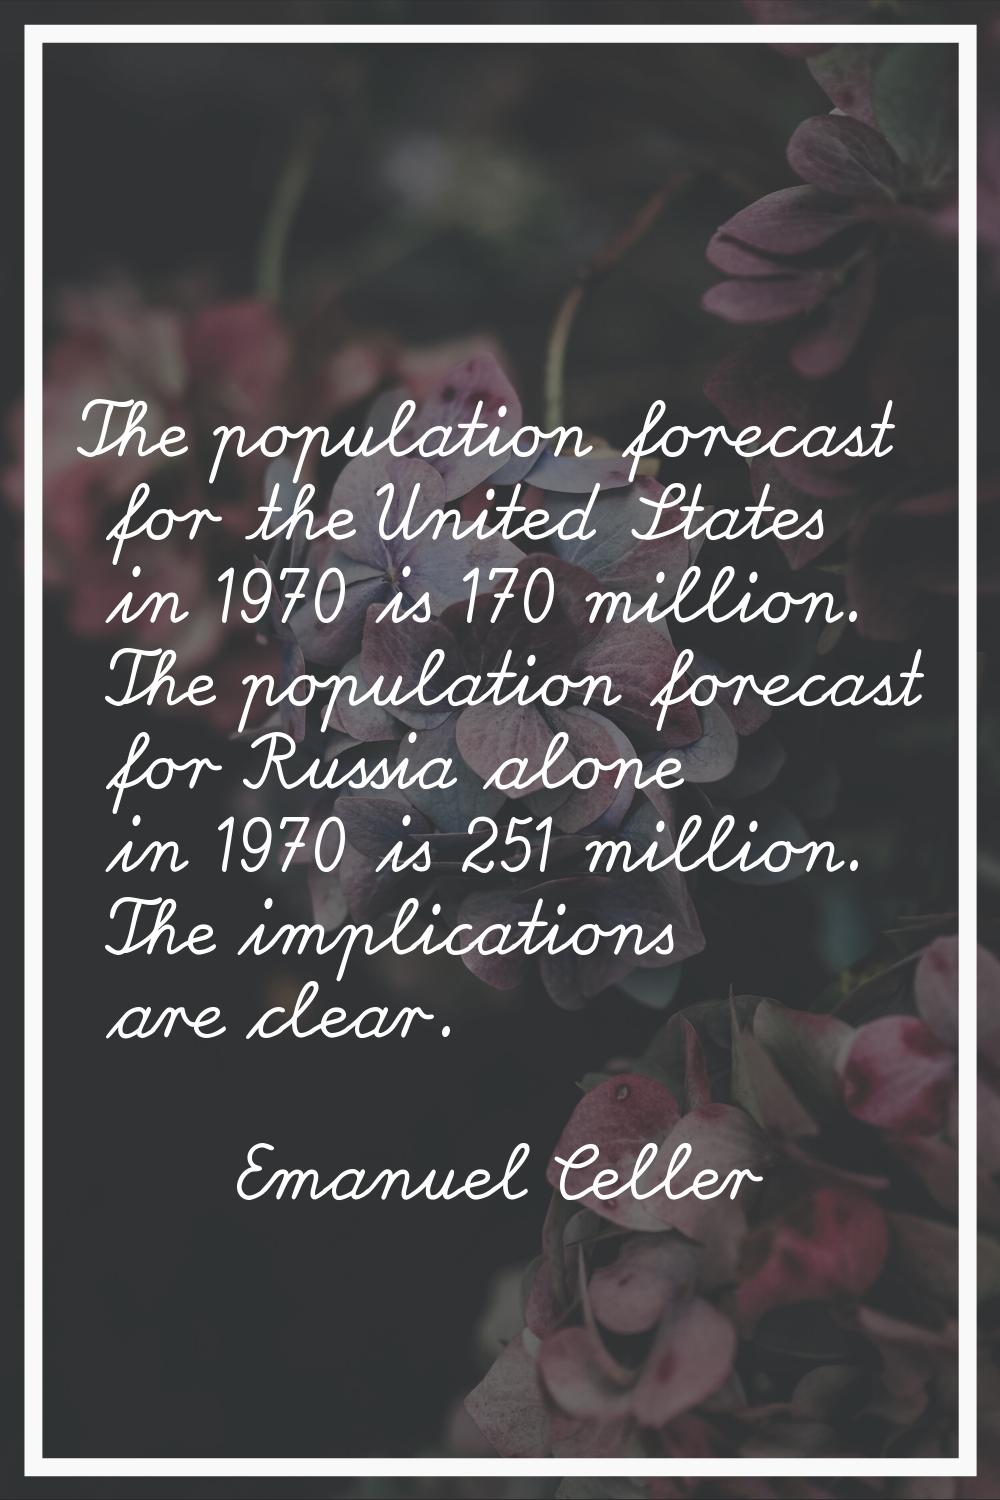 The population forecast for the United States in 1970 is 170 million. The population forecast for R